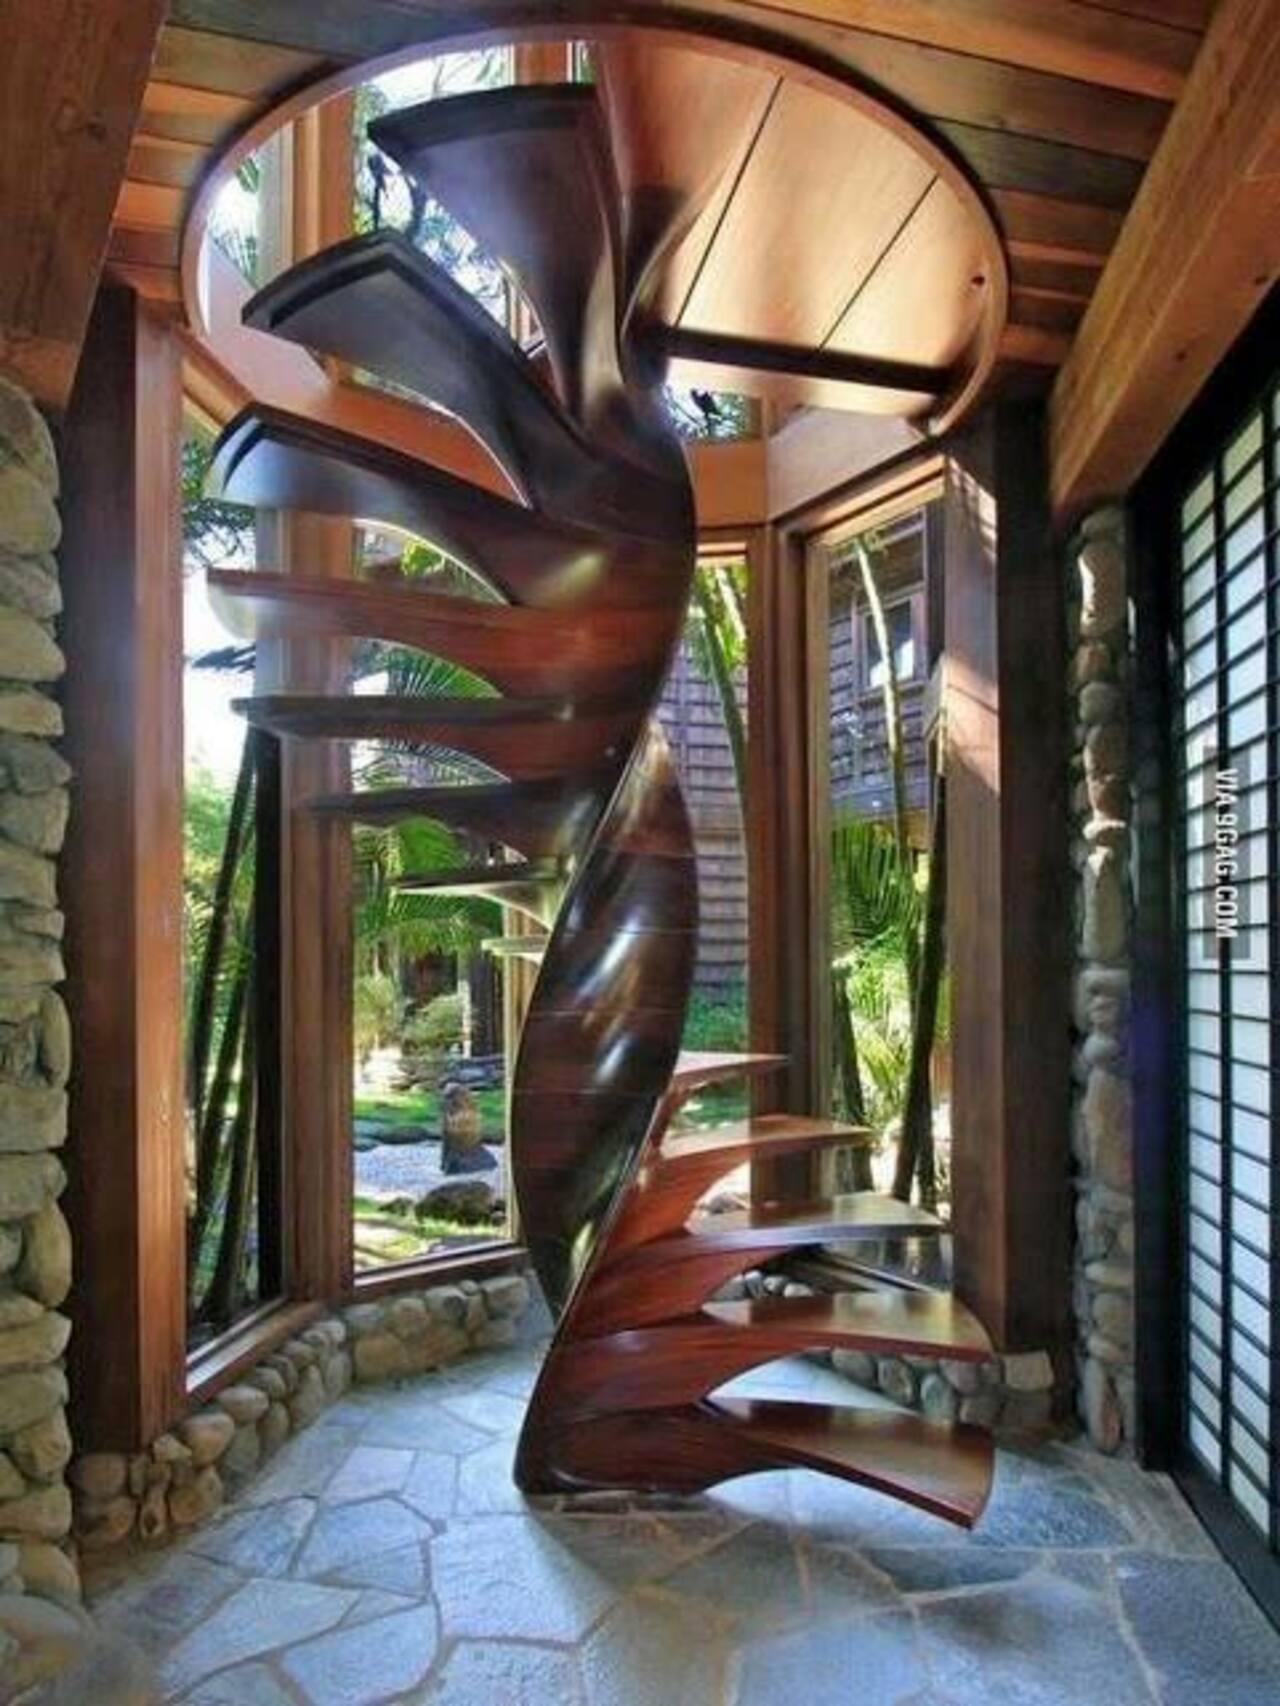 Nice #staircase, needs a handrail though ... https://t.co/pHzfxBeg2J